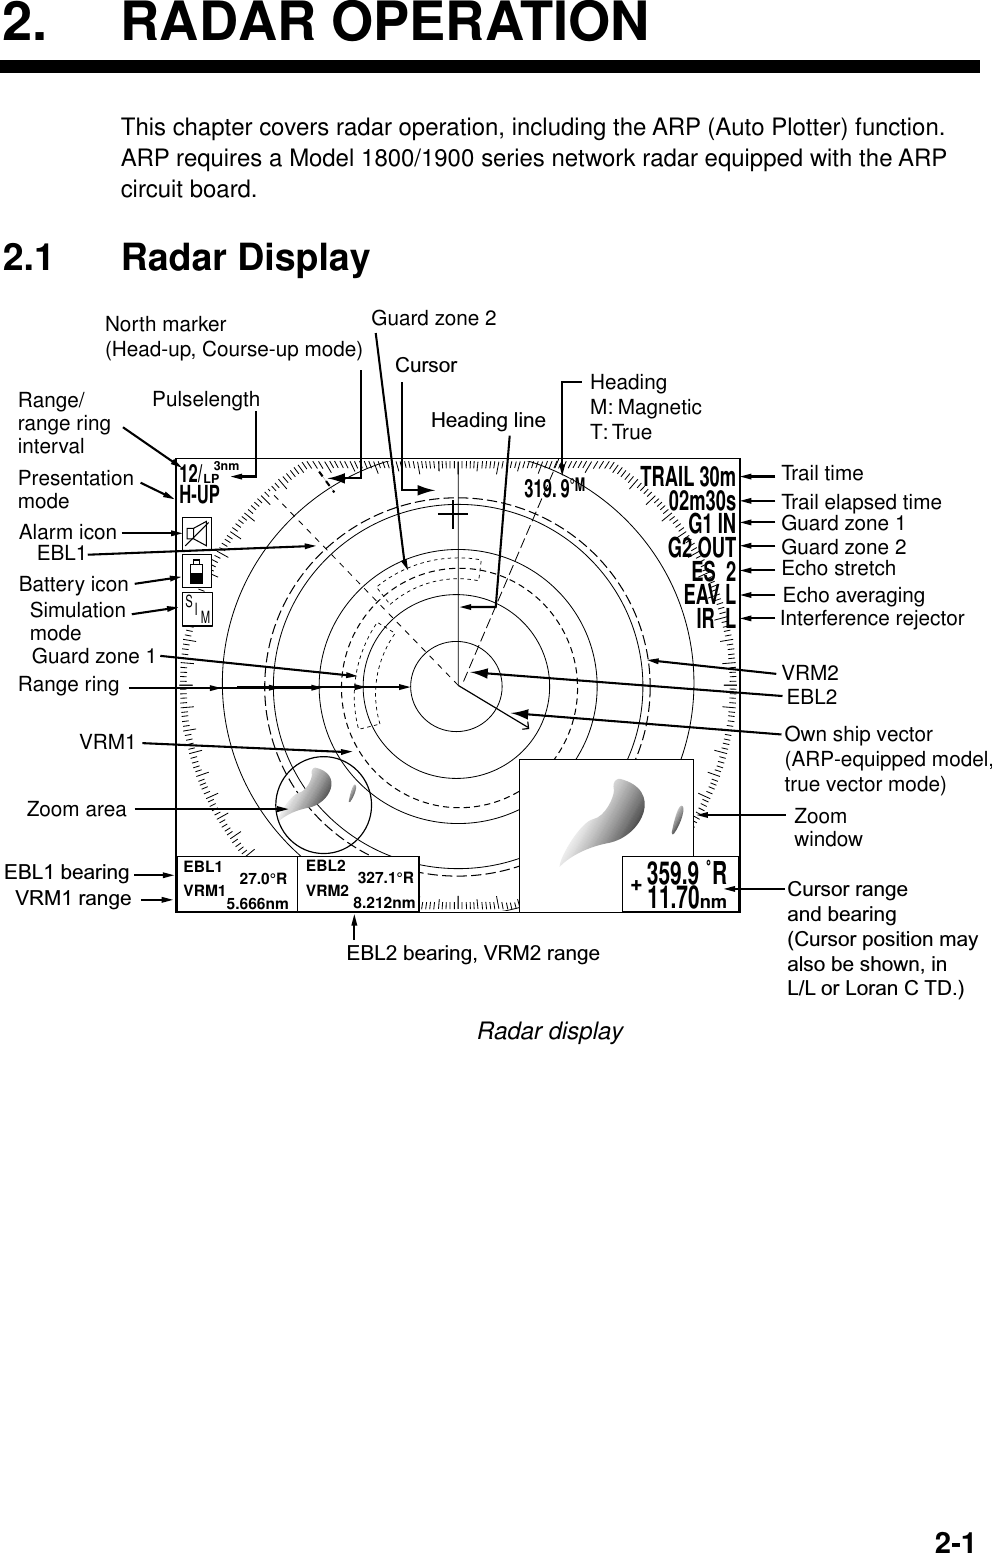   2-12. RADAR OPERATION This chapter covers radar operation, including the ARP (Auto Plotter) function. ARP requires a Model 1800/1900 series network radar equipped with the ARP circuit board.  2.1 Radar Display TRAIL 30m02m30sG1 ING2 OUTES  2EAV LIR  LEBL1             27.0°RVRM1          5.666nmRange/range ring intervalPresentation modeZoom area ZoomwindowGuard zone 1Trail timeTrail elapsed timeGuard zone 1Guard zone 2Echo stretchInterference rejectorGuard zone 2VRM2VRM1EBL1Range ringPulselength HeadingM: MagneticT: TrueHeading lineEBL1 bearingVRM1 range Cursor rangeand bearing(Cursor position mayalso be shown, inL/L or Loran C TD.)EBL2 bearing, VRM2 rangeCursorAlarm iconBattery iconEBL2            327.1°RVRM2           8.212nm12/H-UP    3nmLP319. 9°MEBL2Echo averaging359.9 ˚R 11.70nm+Own ship vector (ARP-equipped model,true vector mode)North marker(Head-up, Course-up mode)S    I     M  Simulationmode Radar display 